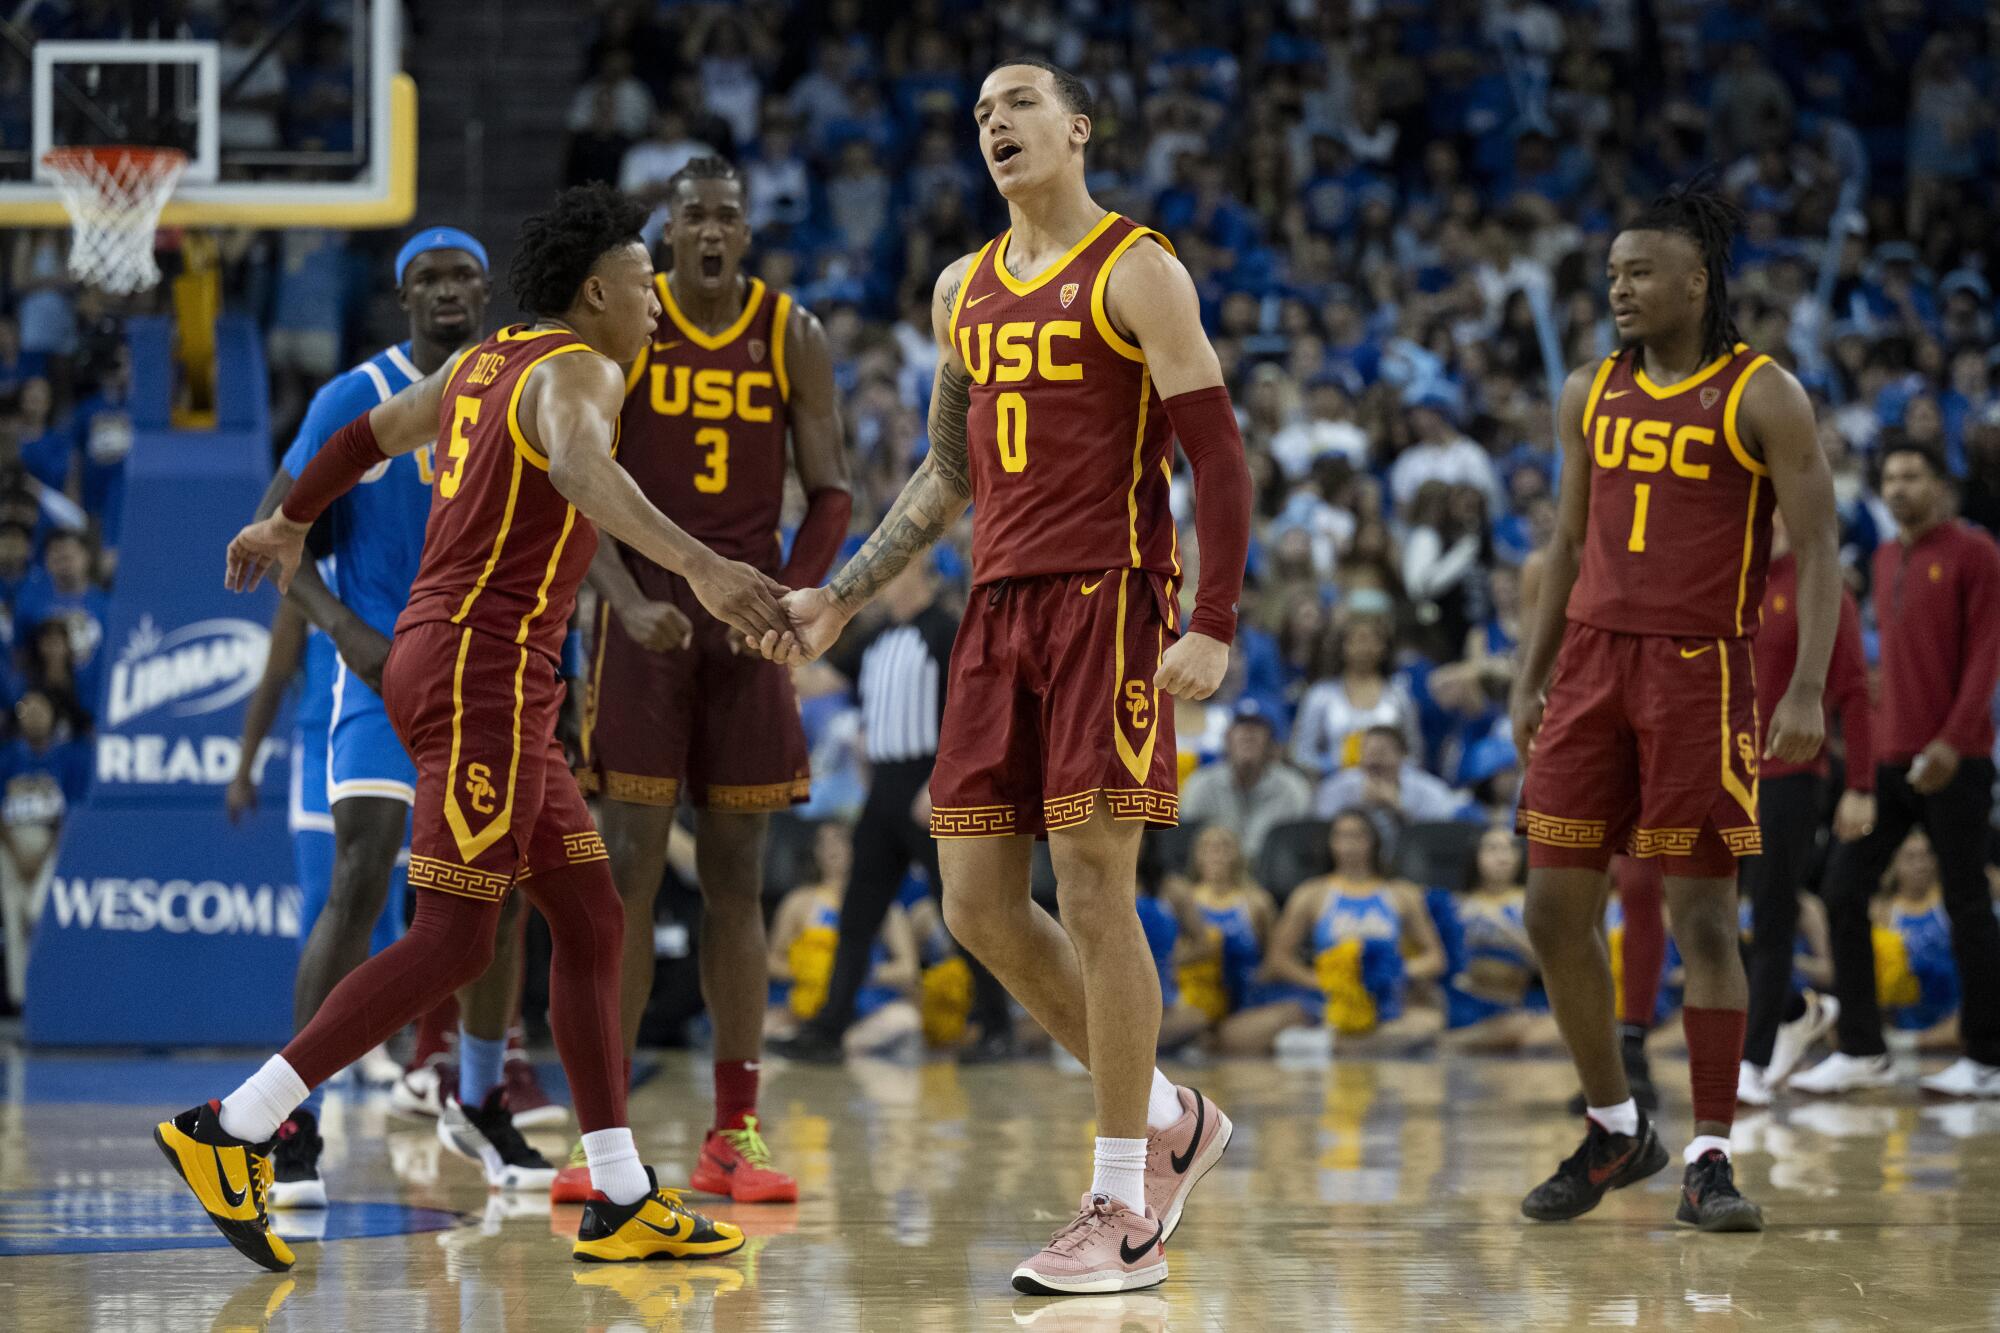 USC guard Kobe Johnson celebrates his basket against UCLA with guard Boogie Ellis and other teammates 